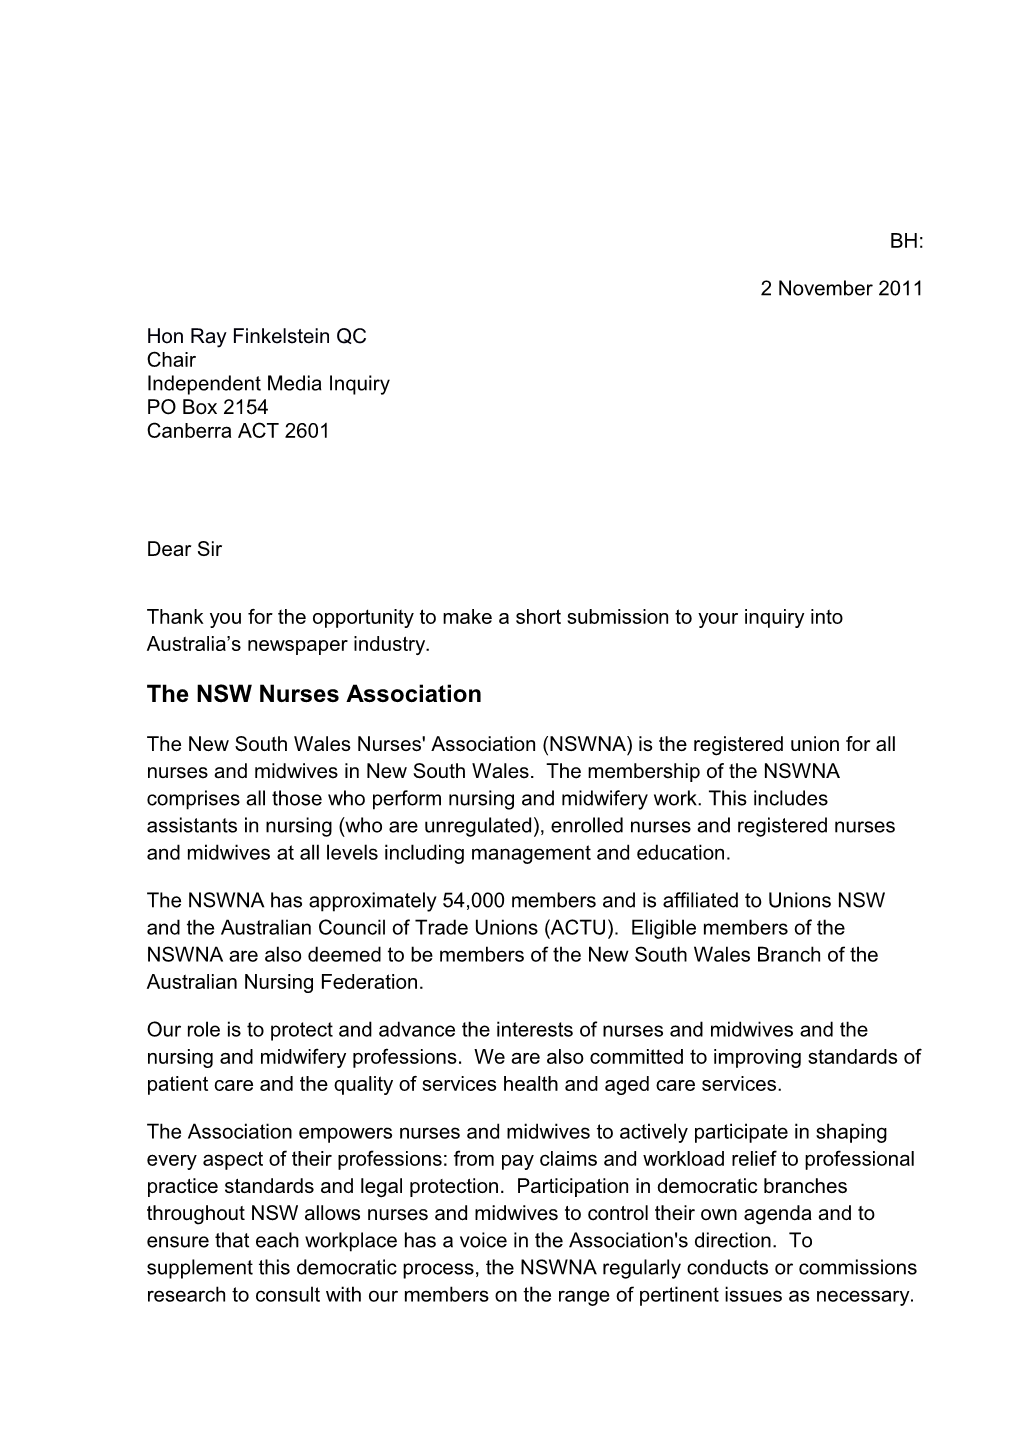 NSWNA Letter Template